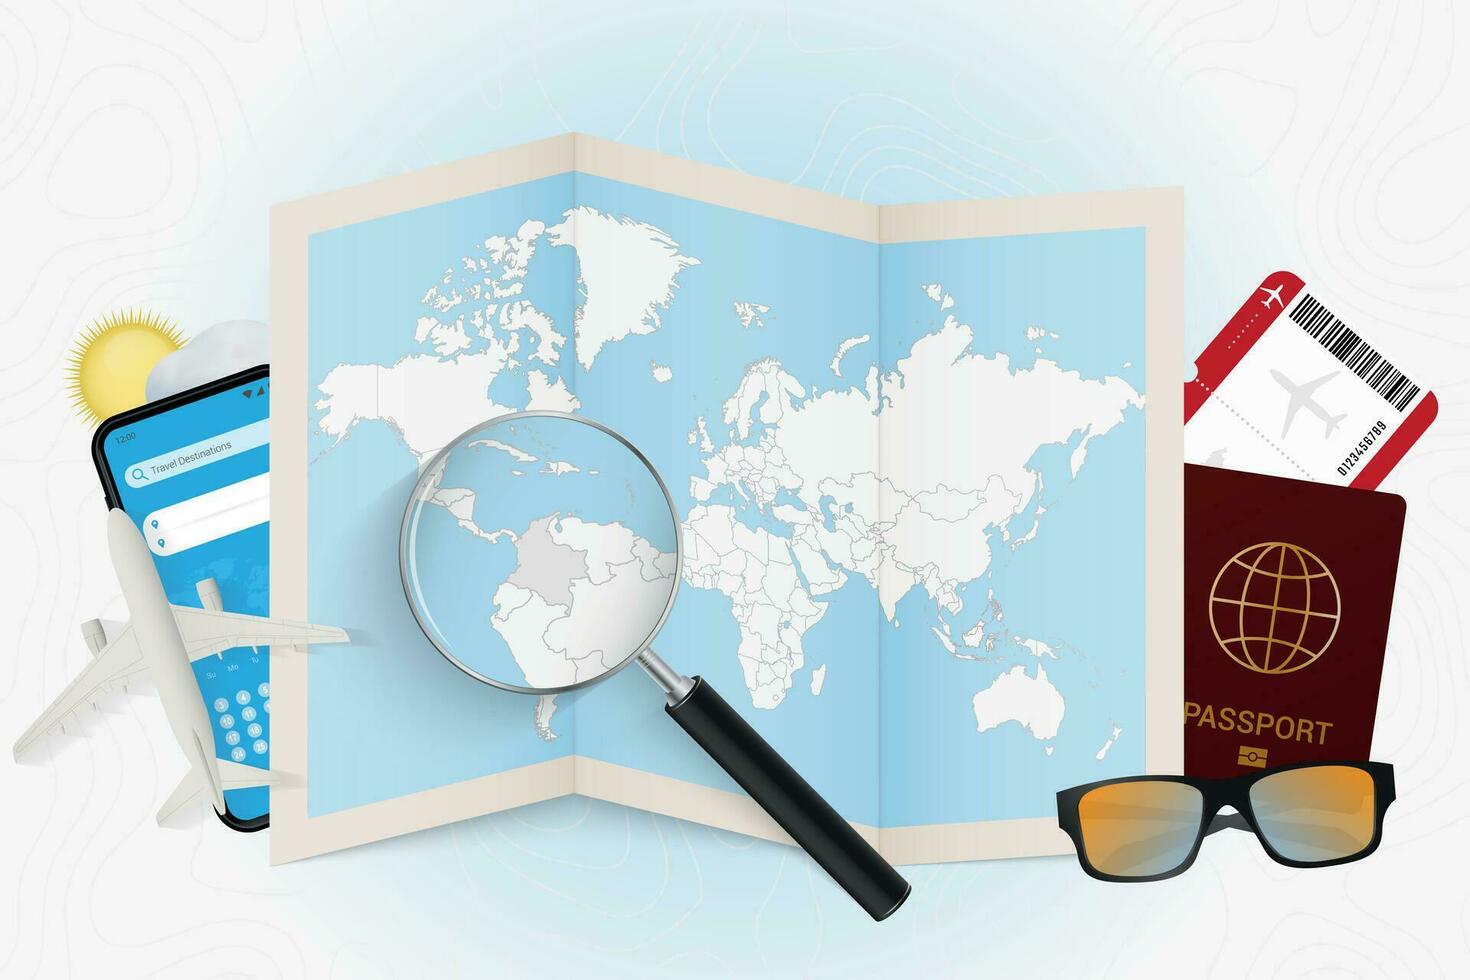 Travel destination Colombia, tourism mockup with travel equipment and world map with magnifying glass on a Colombia. vector